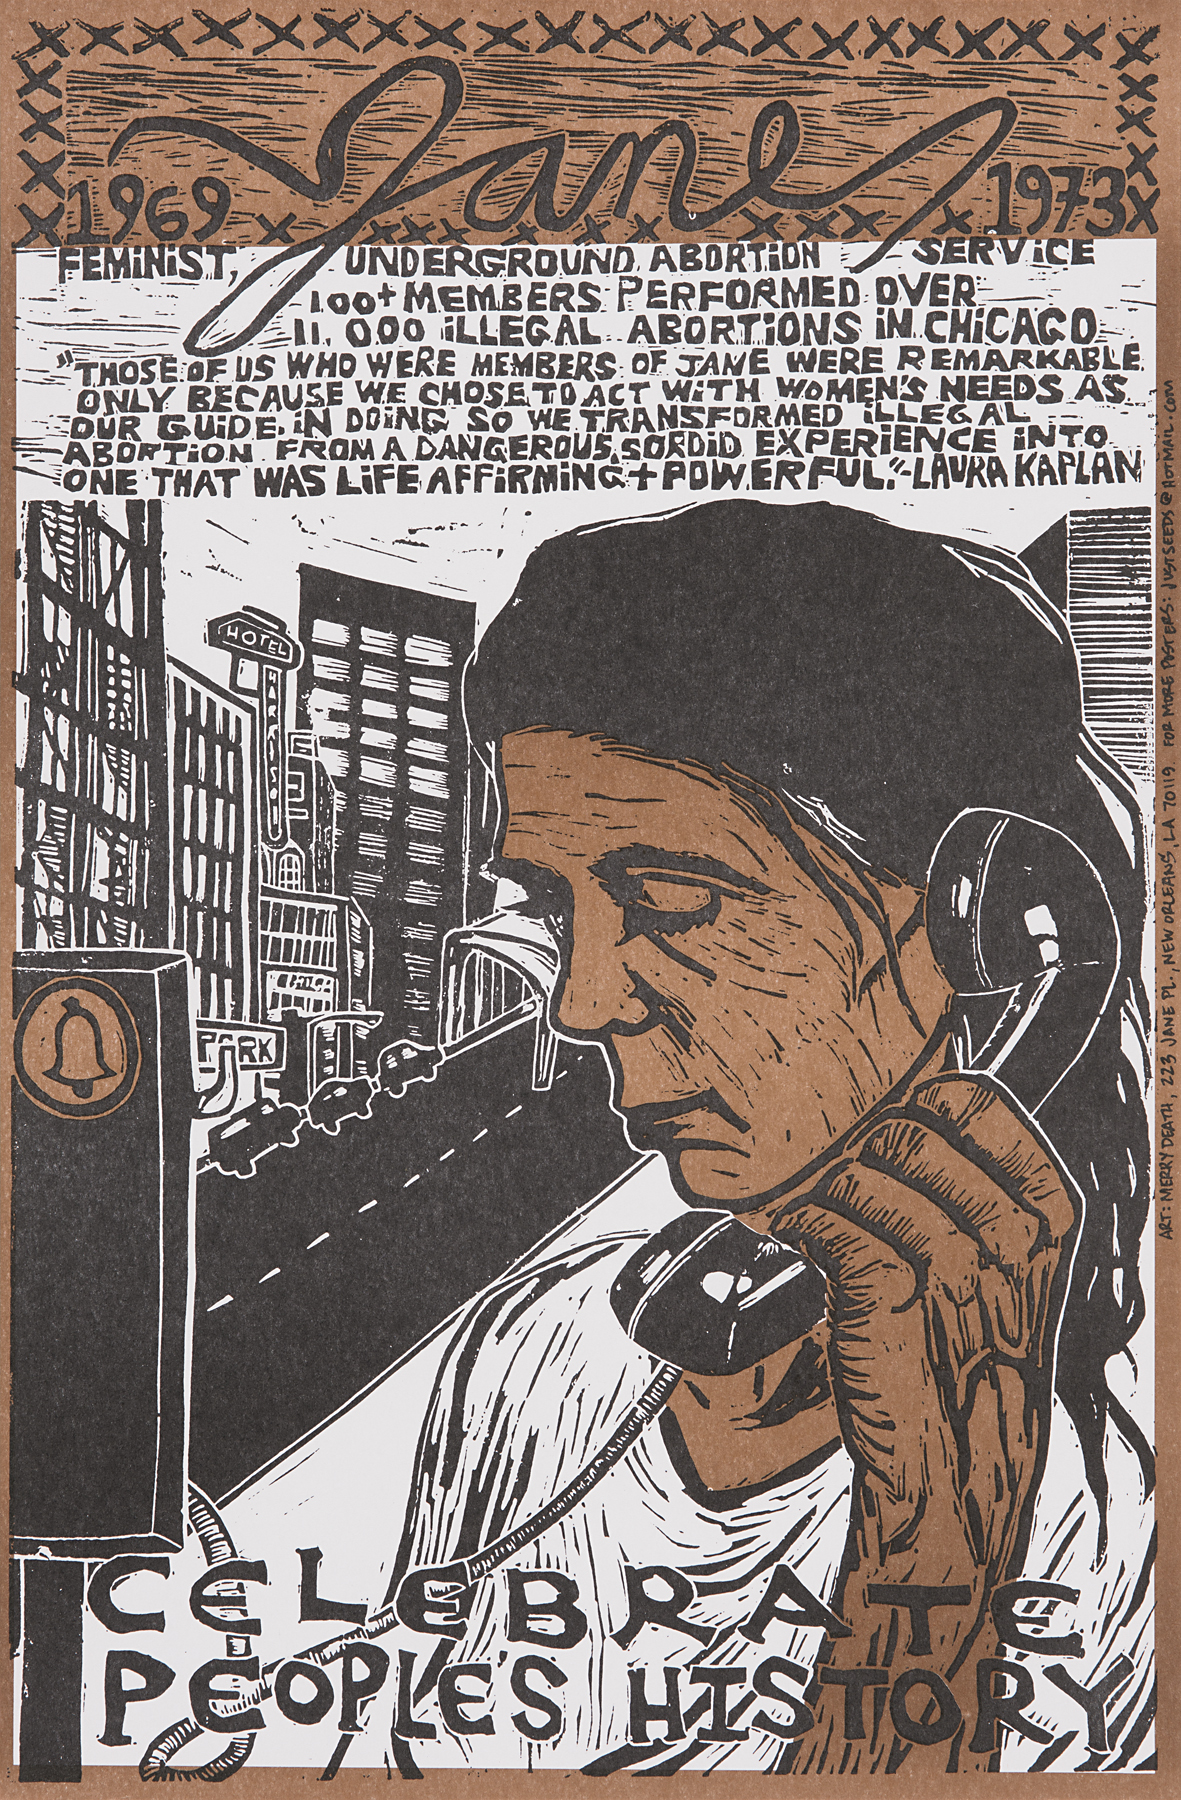 Image of a woman on a telephone with a city in the background. Executed in the style of a woodcut in black and brown. Text above the image refers to Jane, also known as the Jane Collective or the Abortion Counseling Service of Women’s Liberation, an underground service in Chicago, Illinois that operated from 1969-1973. There is also a quote by activist and author Laura Kaplan.